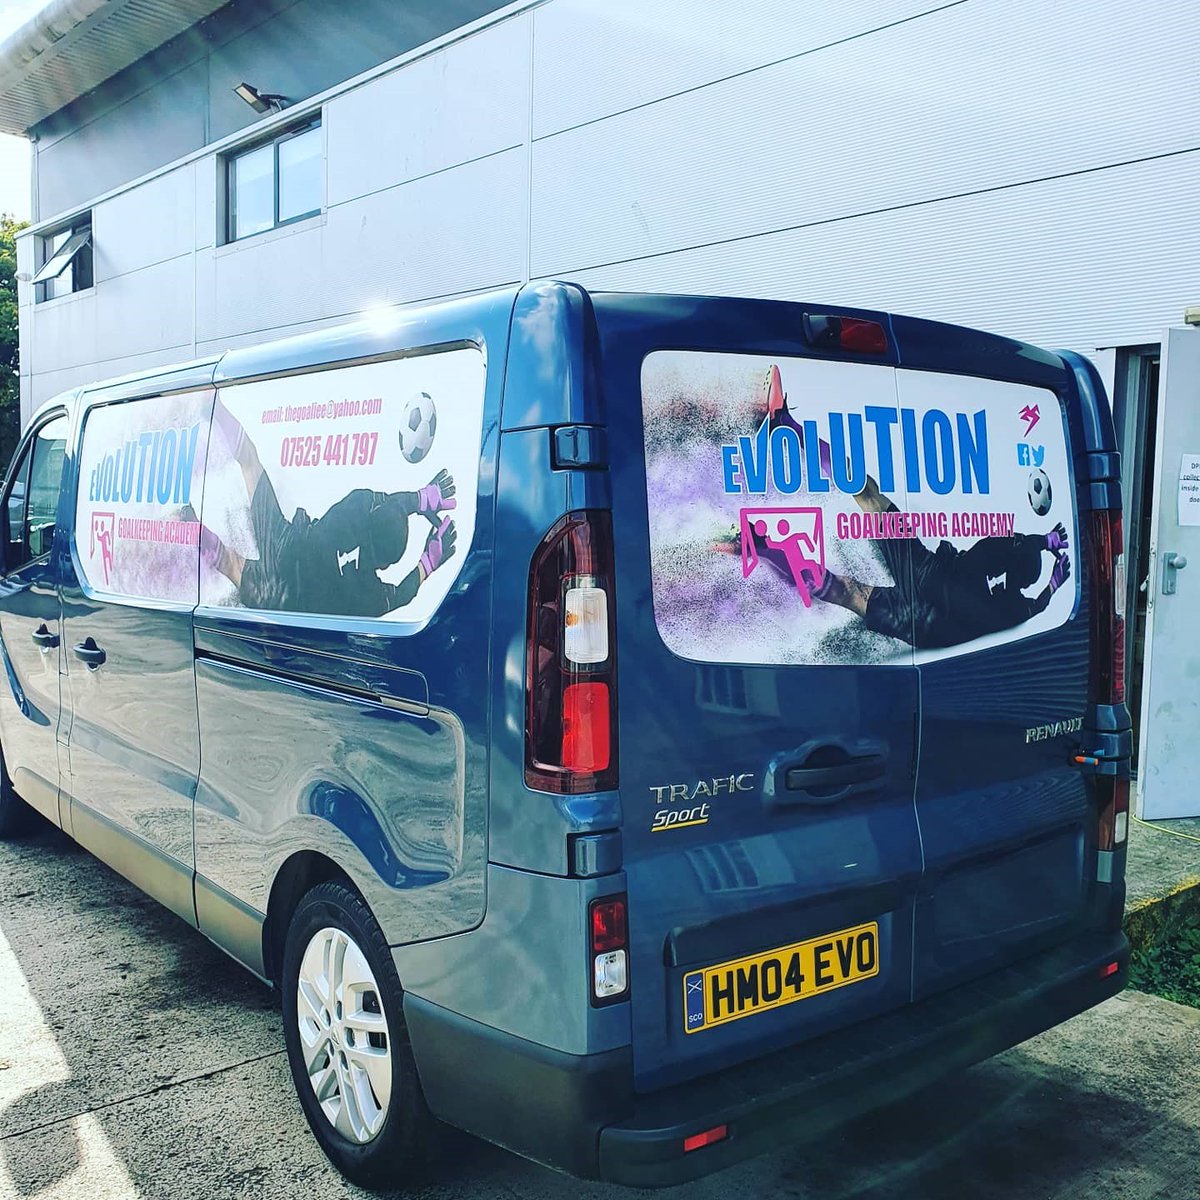 Cracking day for a wee van install @EvolutionGKA